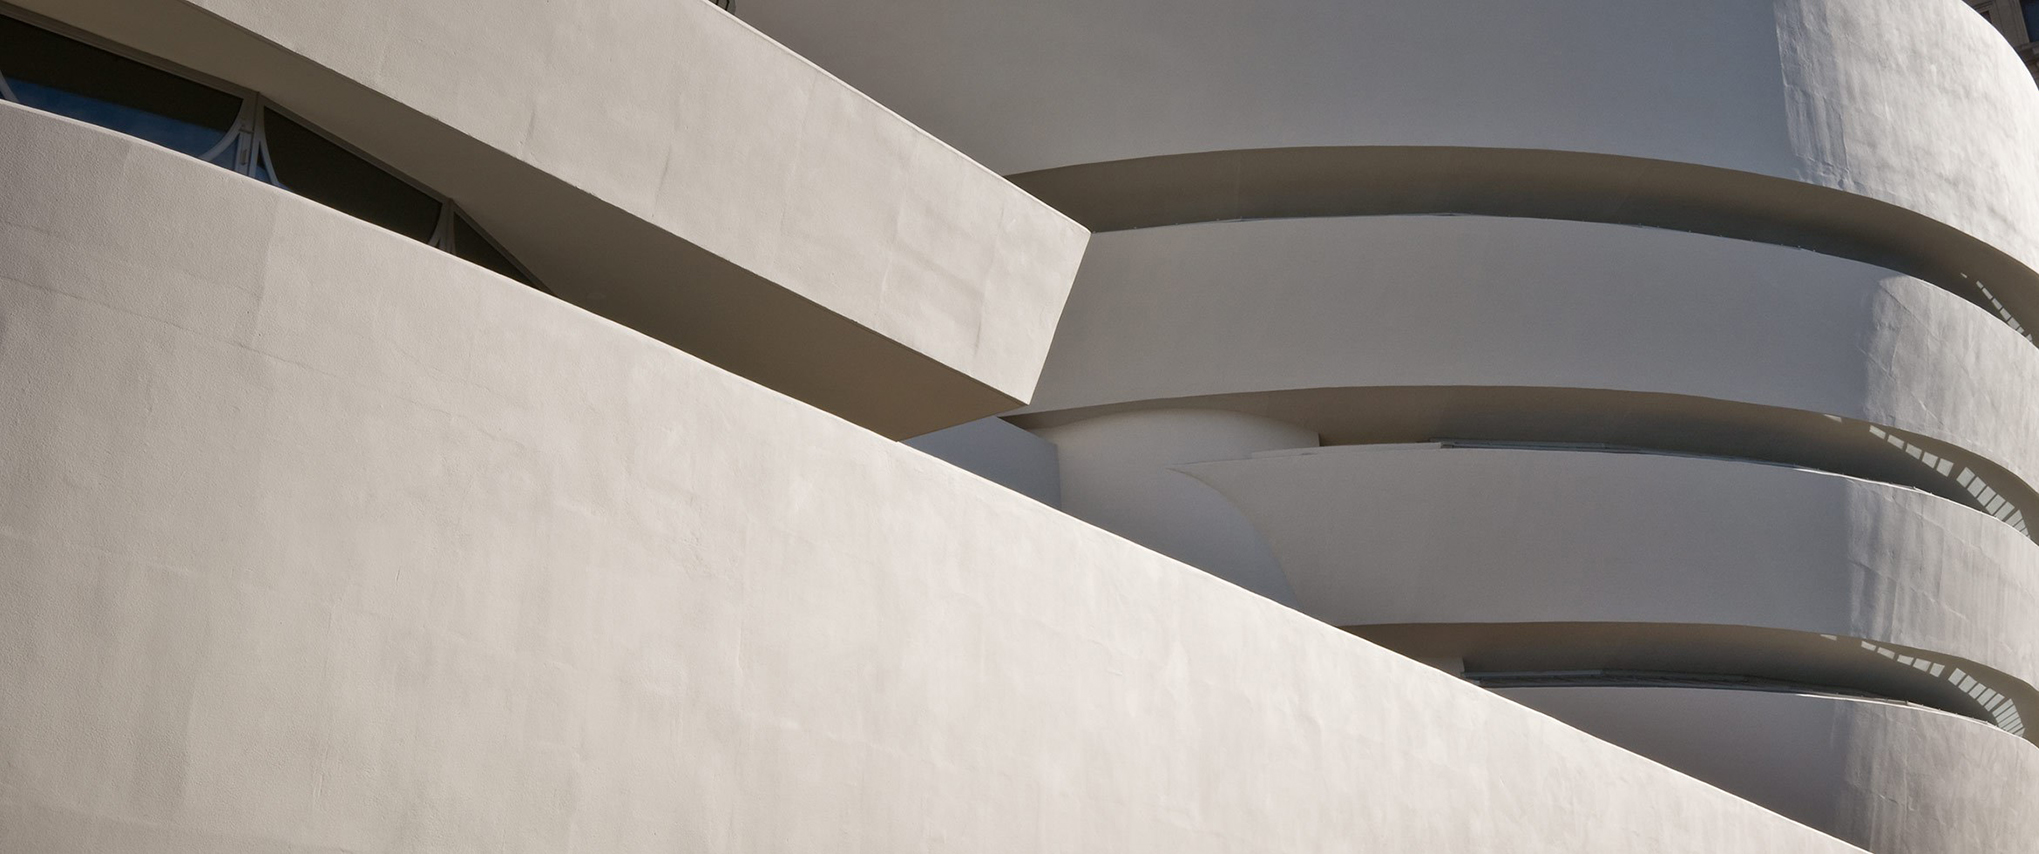 exterior shot of the architecture of the Guggenheim building